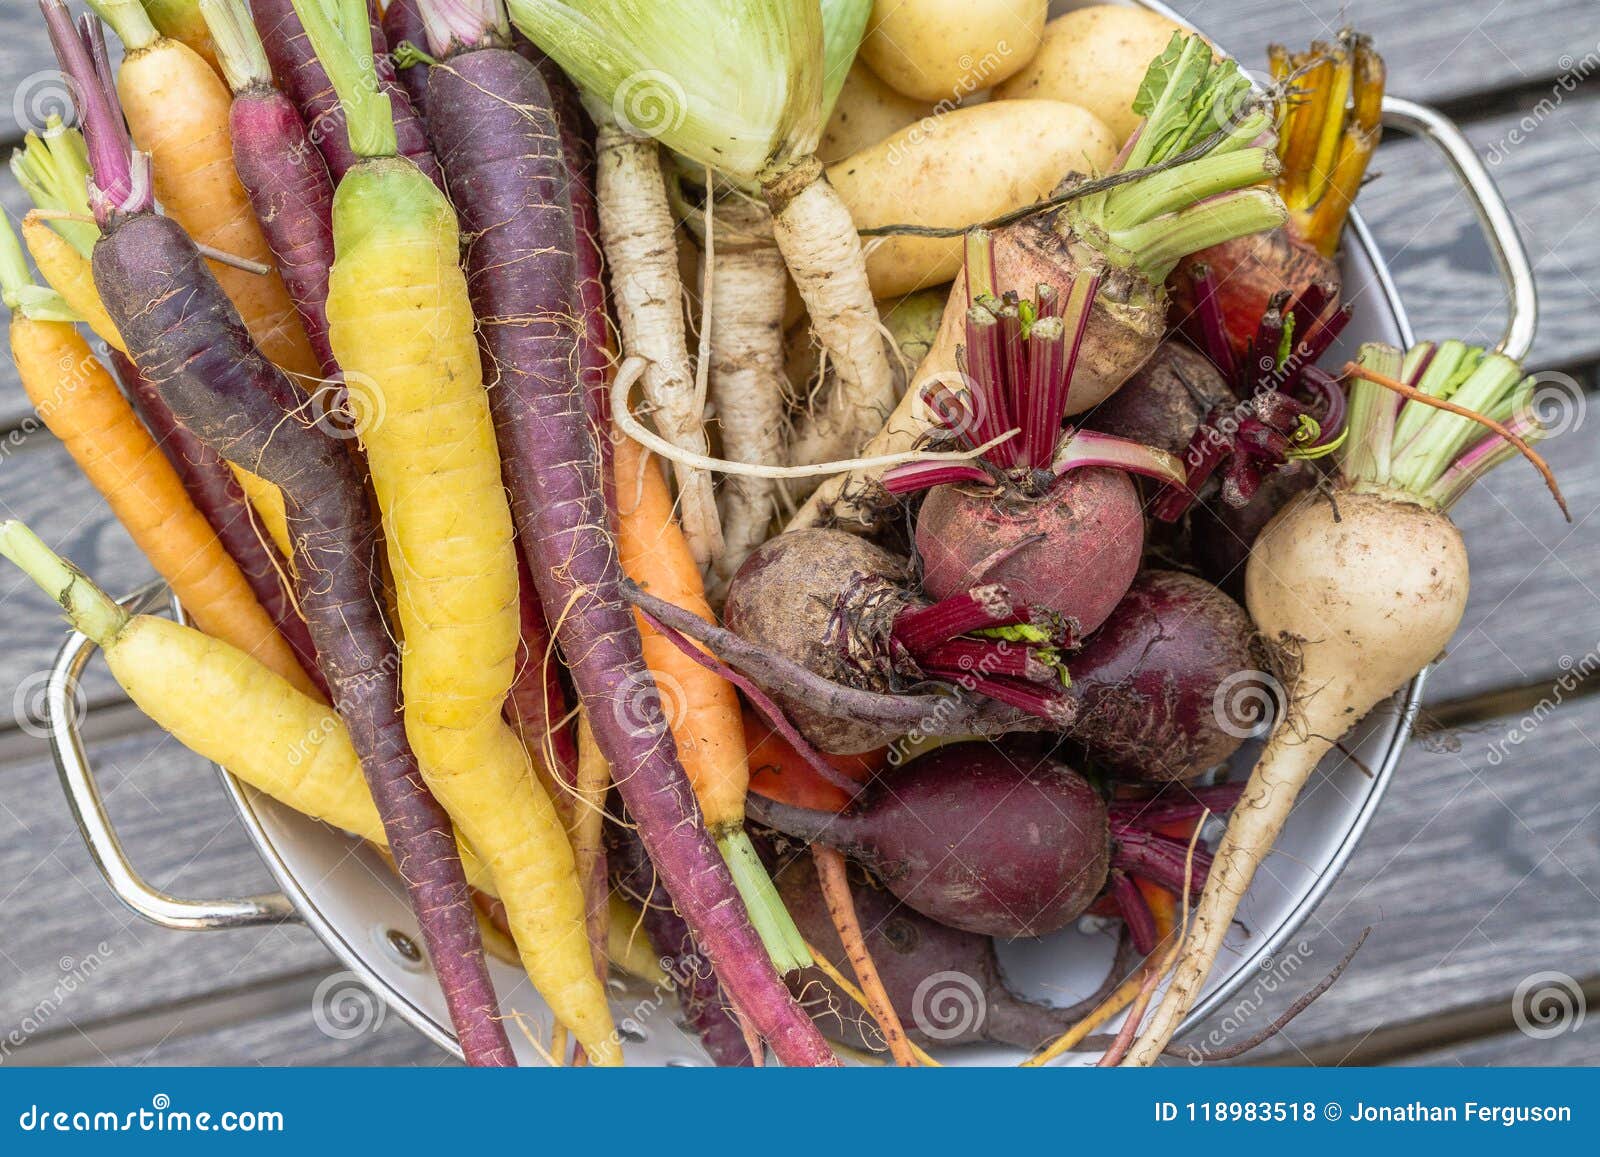 root vegetables from the garden